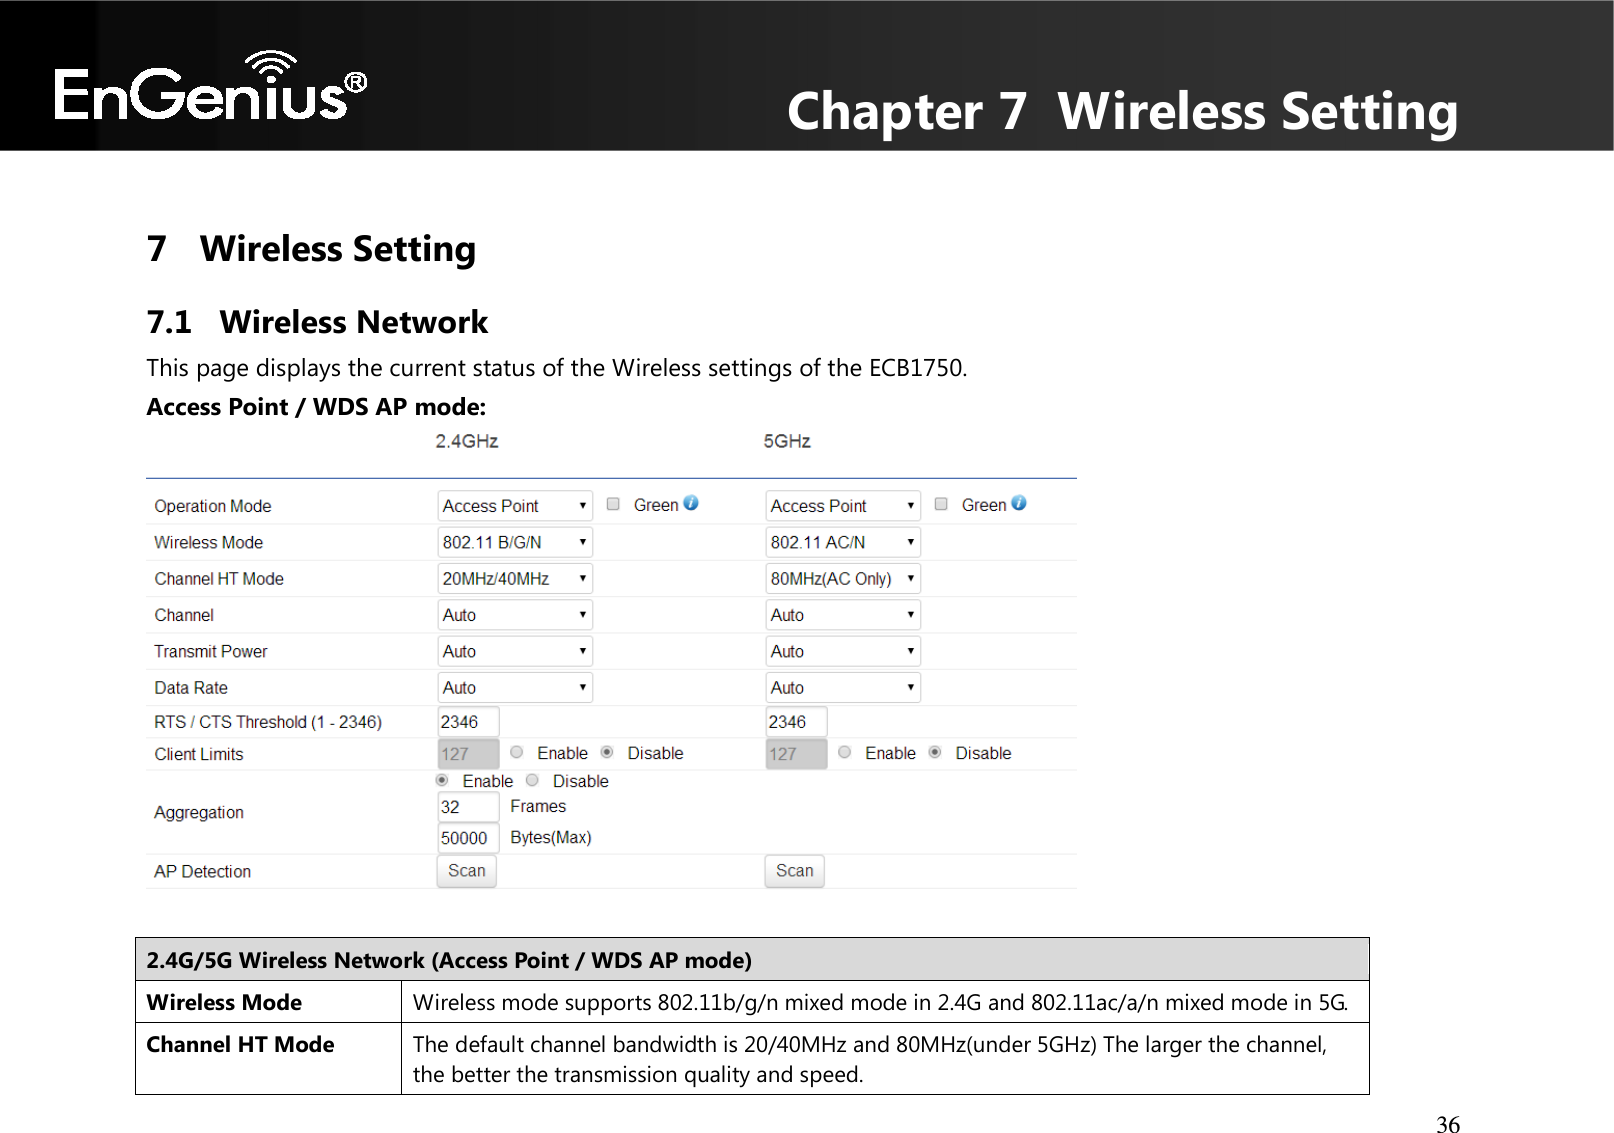 Chapter 7  Wireless Setting 36   7 Wireless Setting 7.1 Wireless Network This page displays the current status of the Wireless settings of the ECB1750. Access Point / WDS AP mode:    2.4G/5G Wireless Network (Access Point / WDS AP mode) Wireless Mode Wireless mode supports 802.11b/g/n mixed mode in 2.4G and 802.11ac/a/n mixed mode in 5G. Channel HT Mode The default channel bandwidth is 20/40MHz and 80MHz(under 5GHz) The larger the channel, the better the transmission quality and speed. 